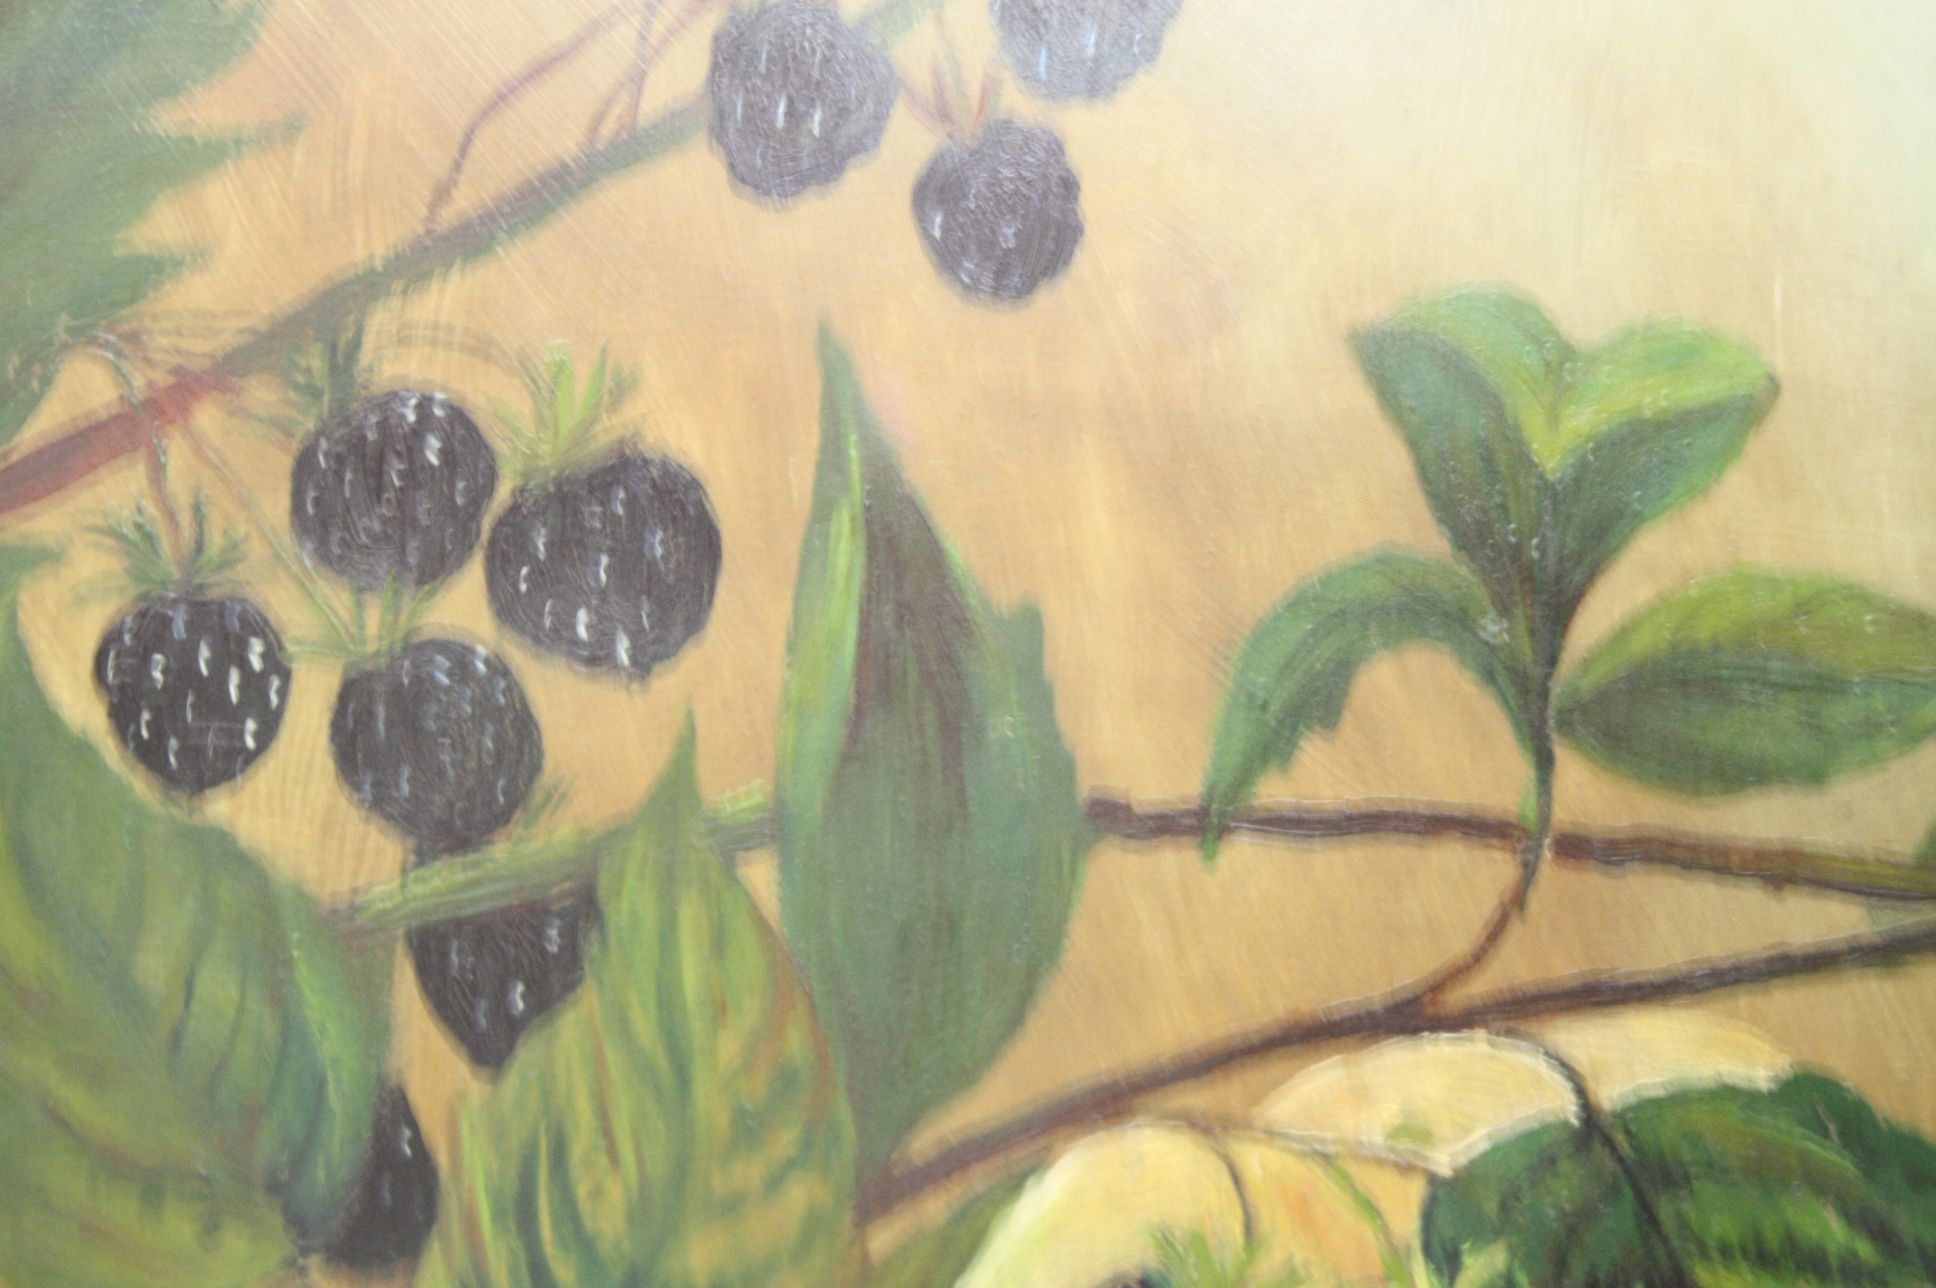 Oil Painting on Board of Fruits including Blackberries, Strawberries, Apples and Pears, 59cms x - Image 3 of 3